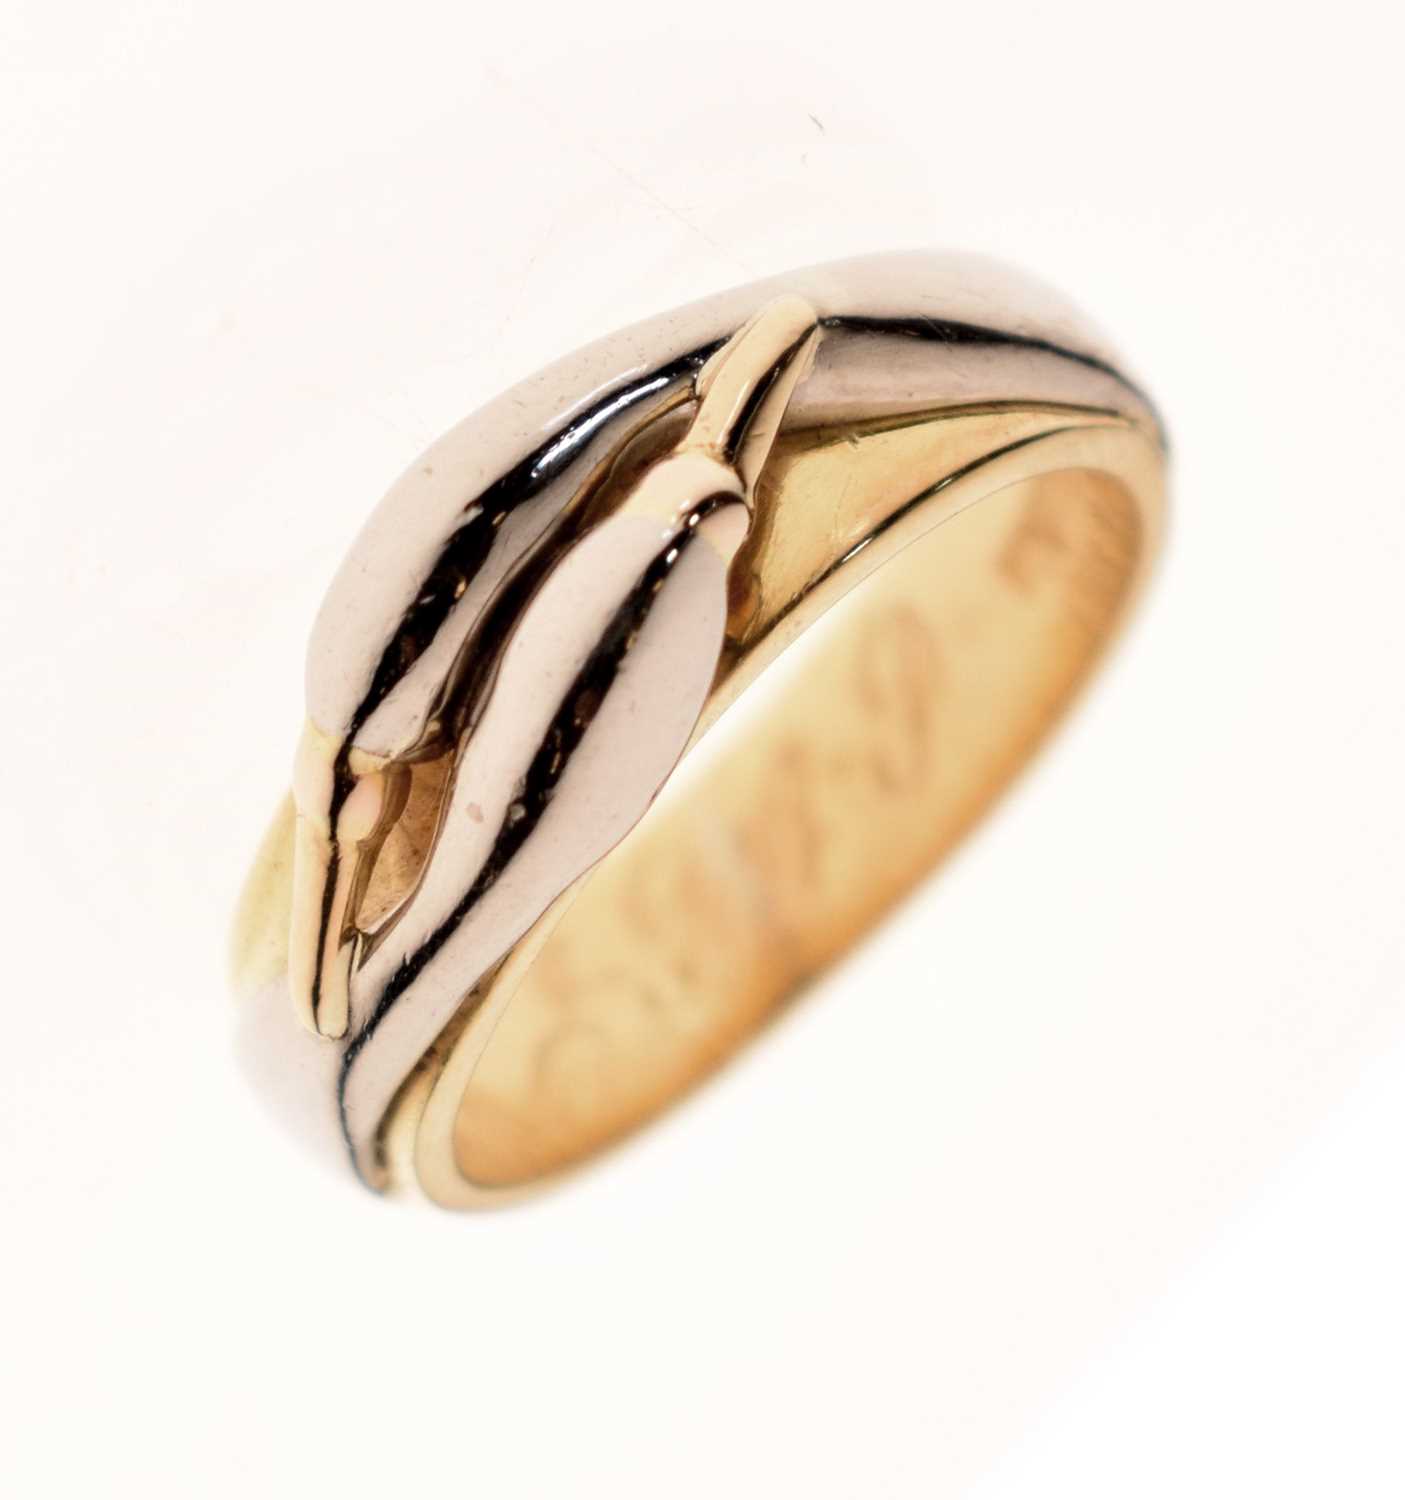 Lot 13 - 18ct gold 'Double Swan' wedding band ring